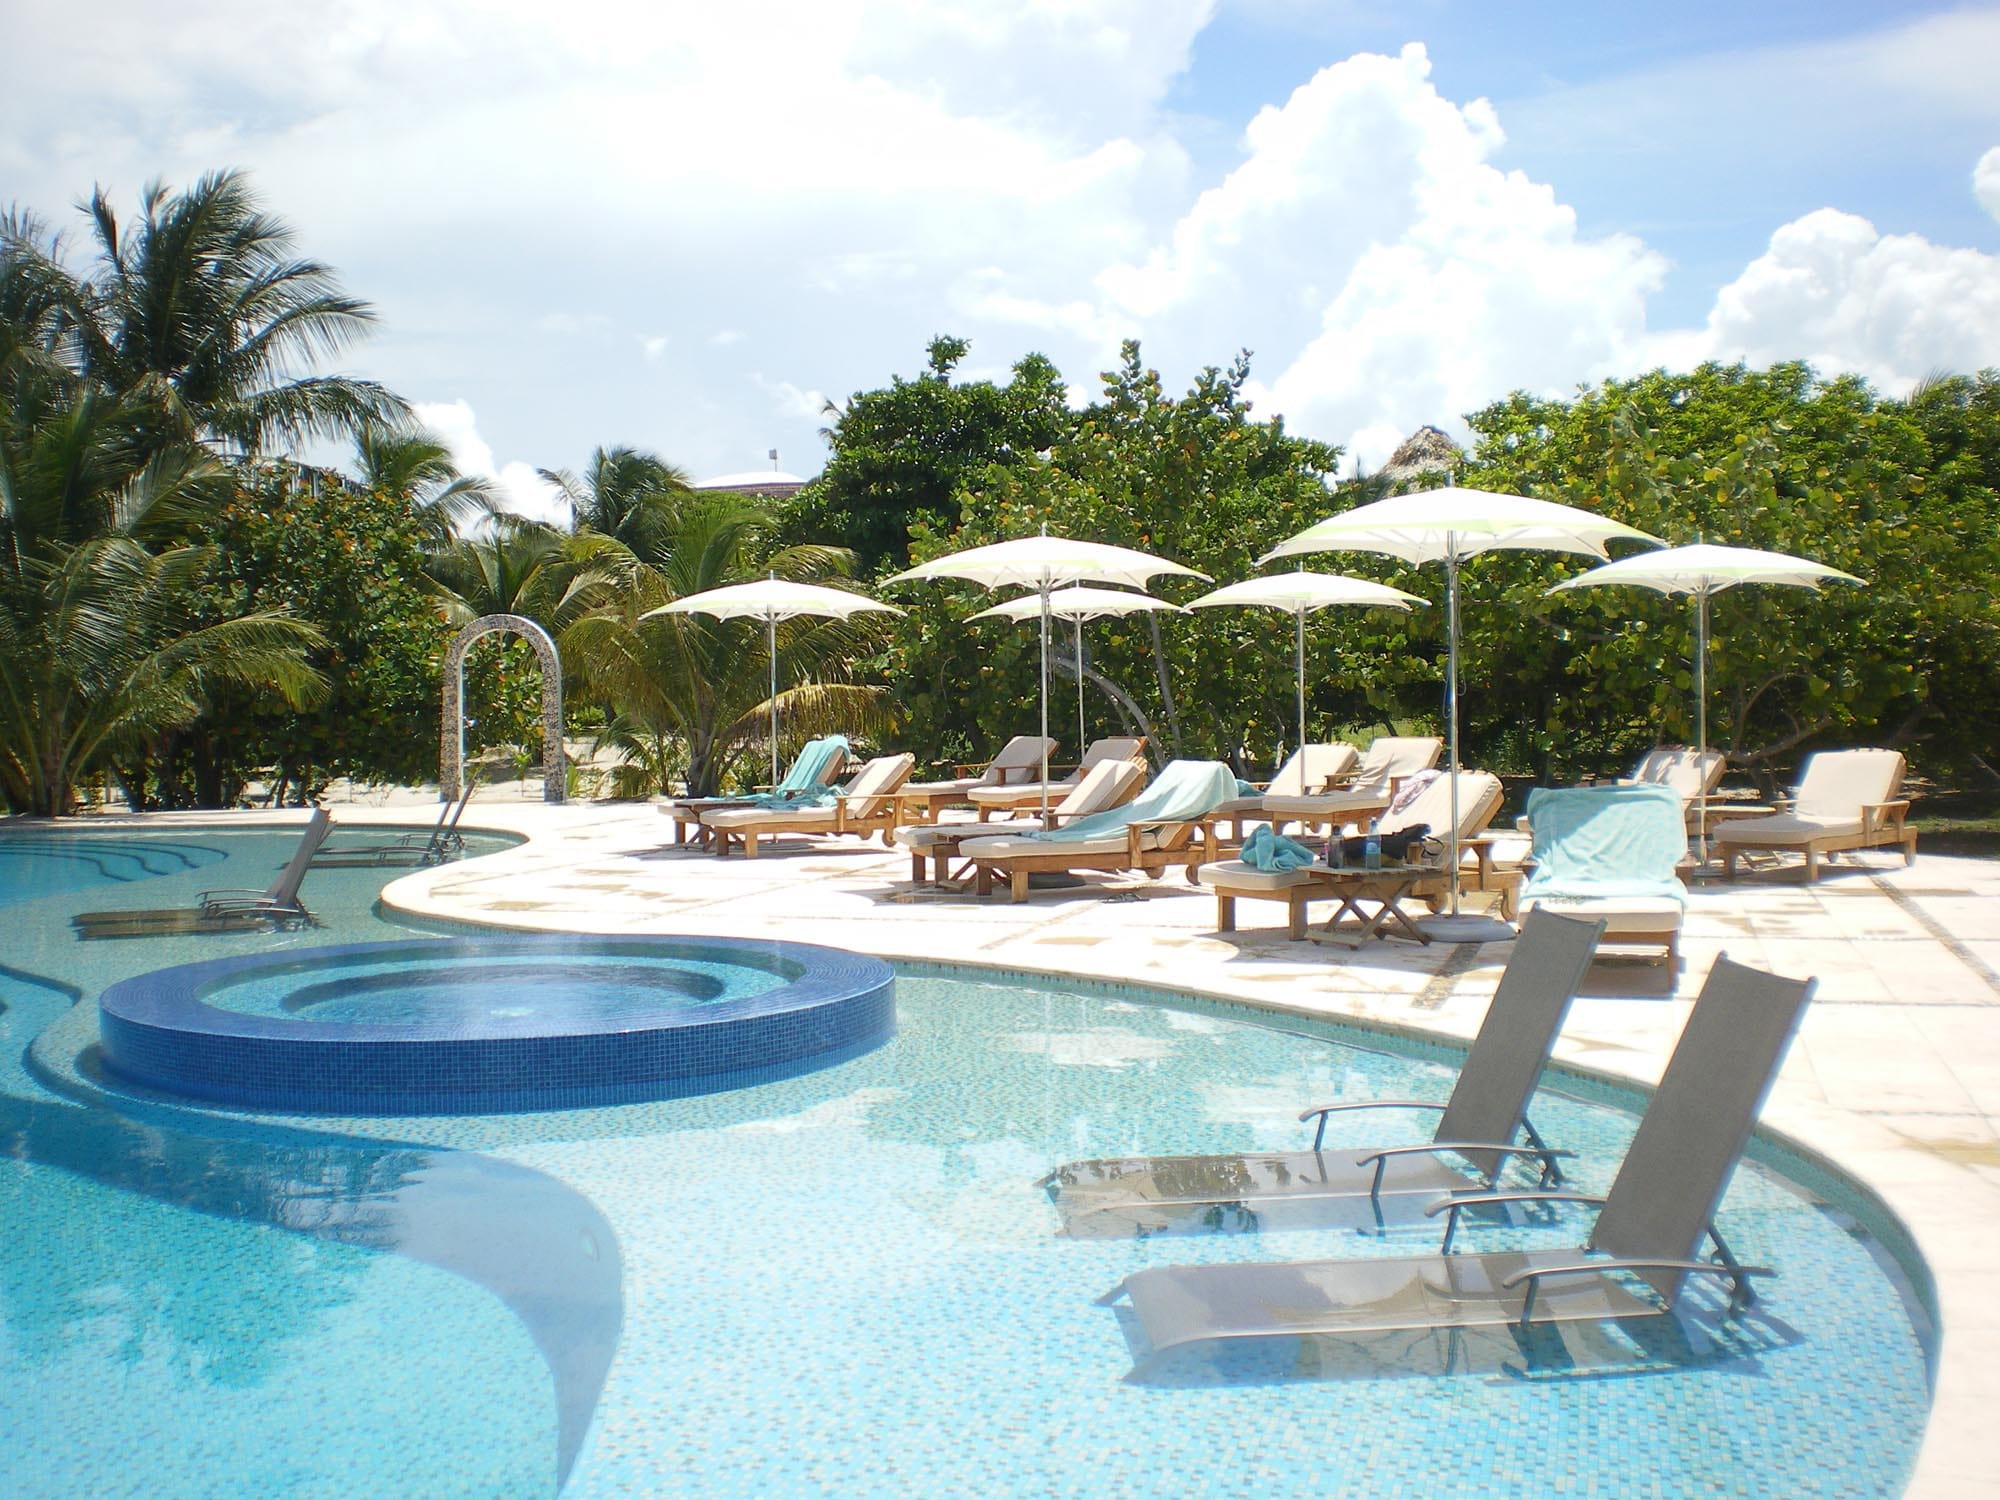 Best Hotels with Pools in the Caribbean: Matachica